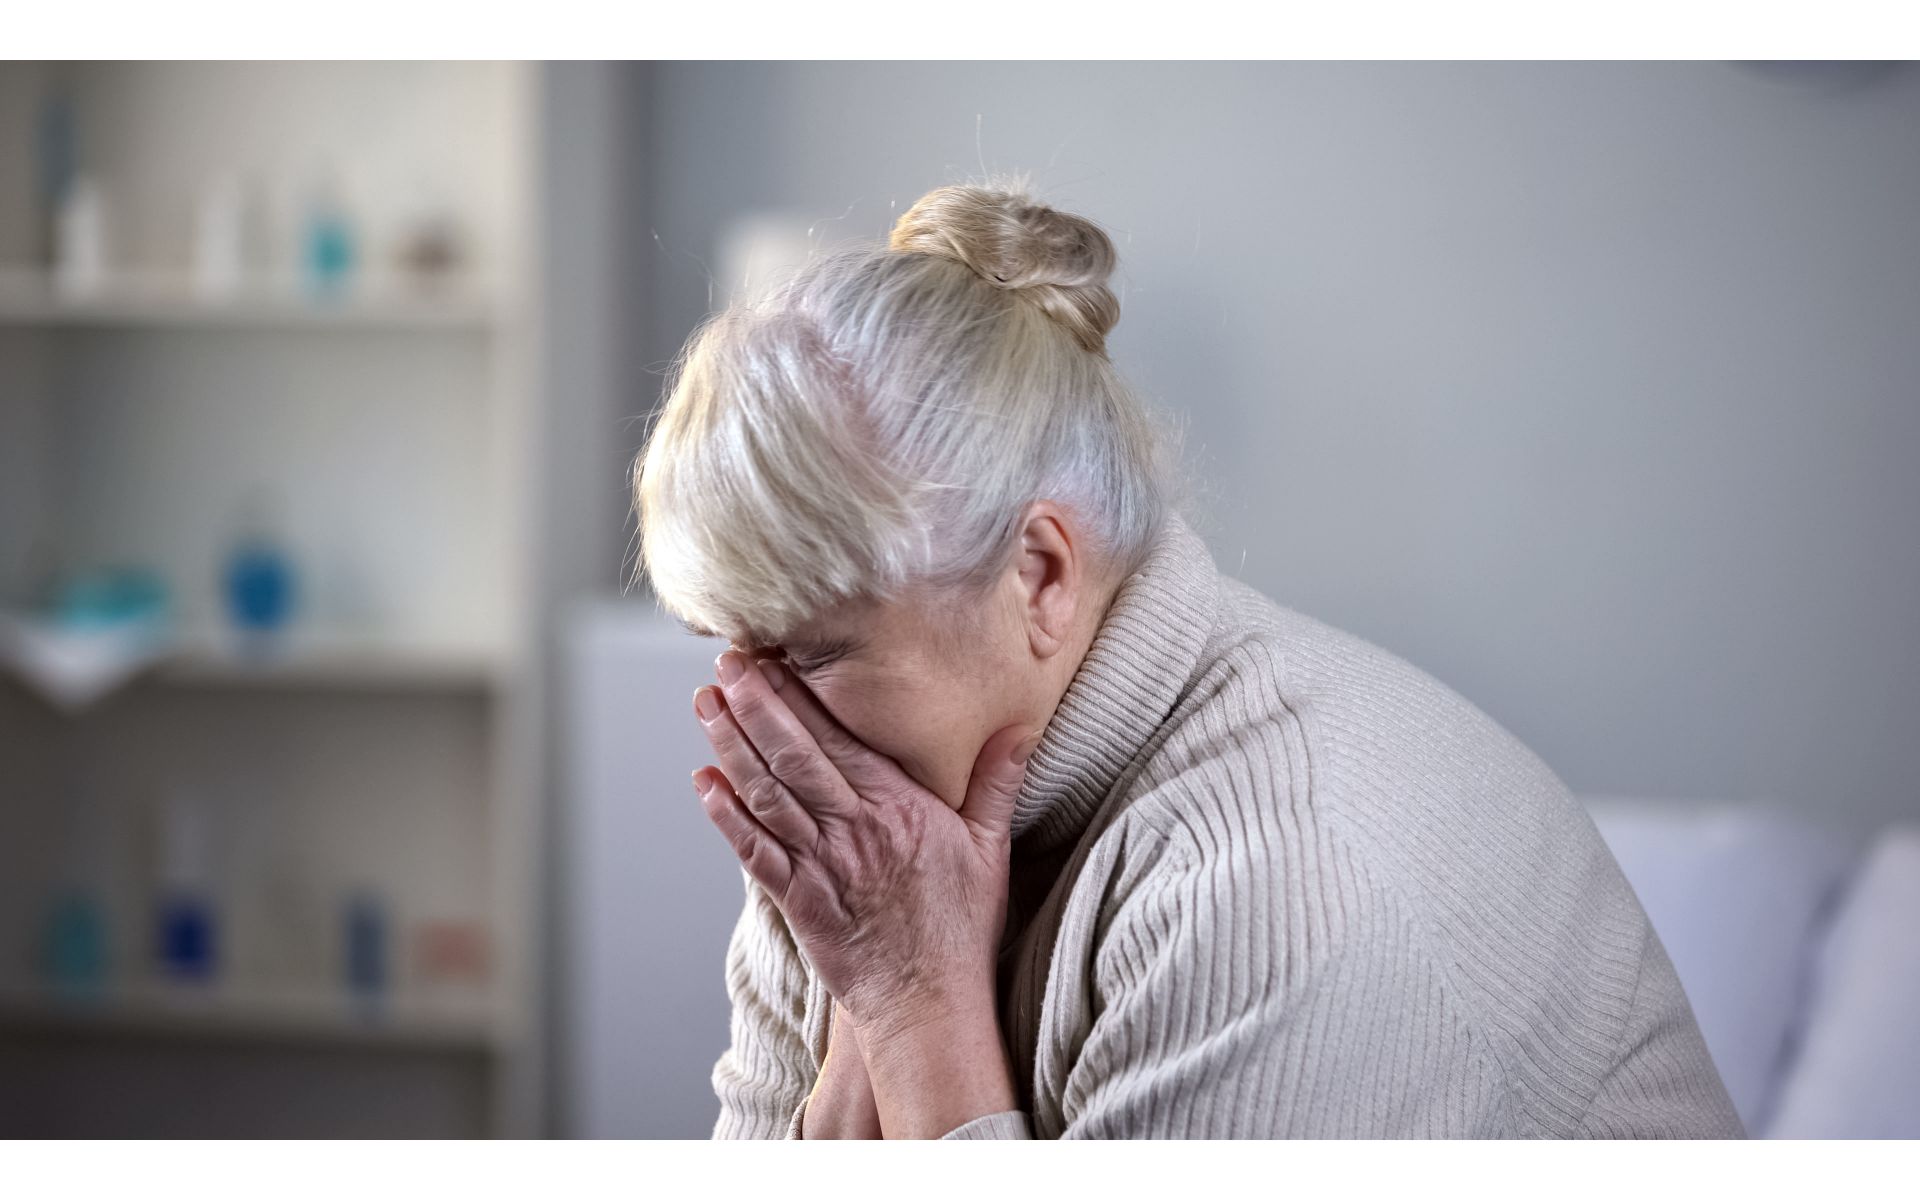 An older woman is upset. Cover image for article about being patient with older family members.